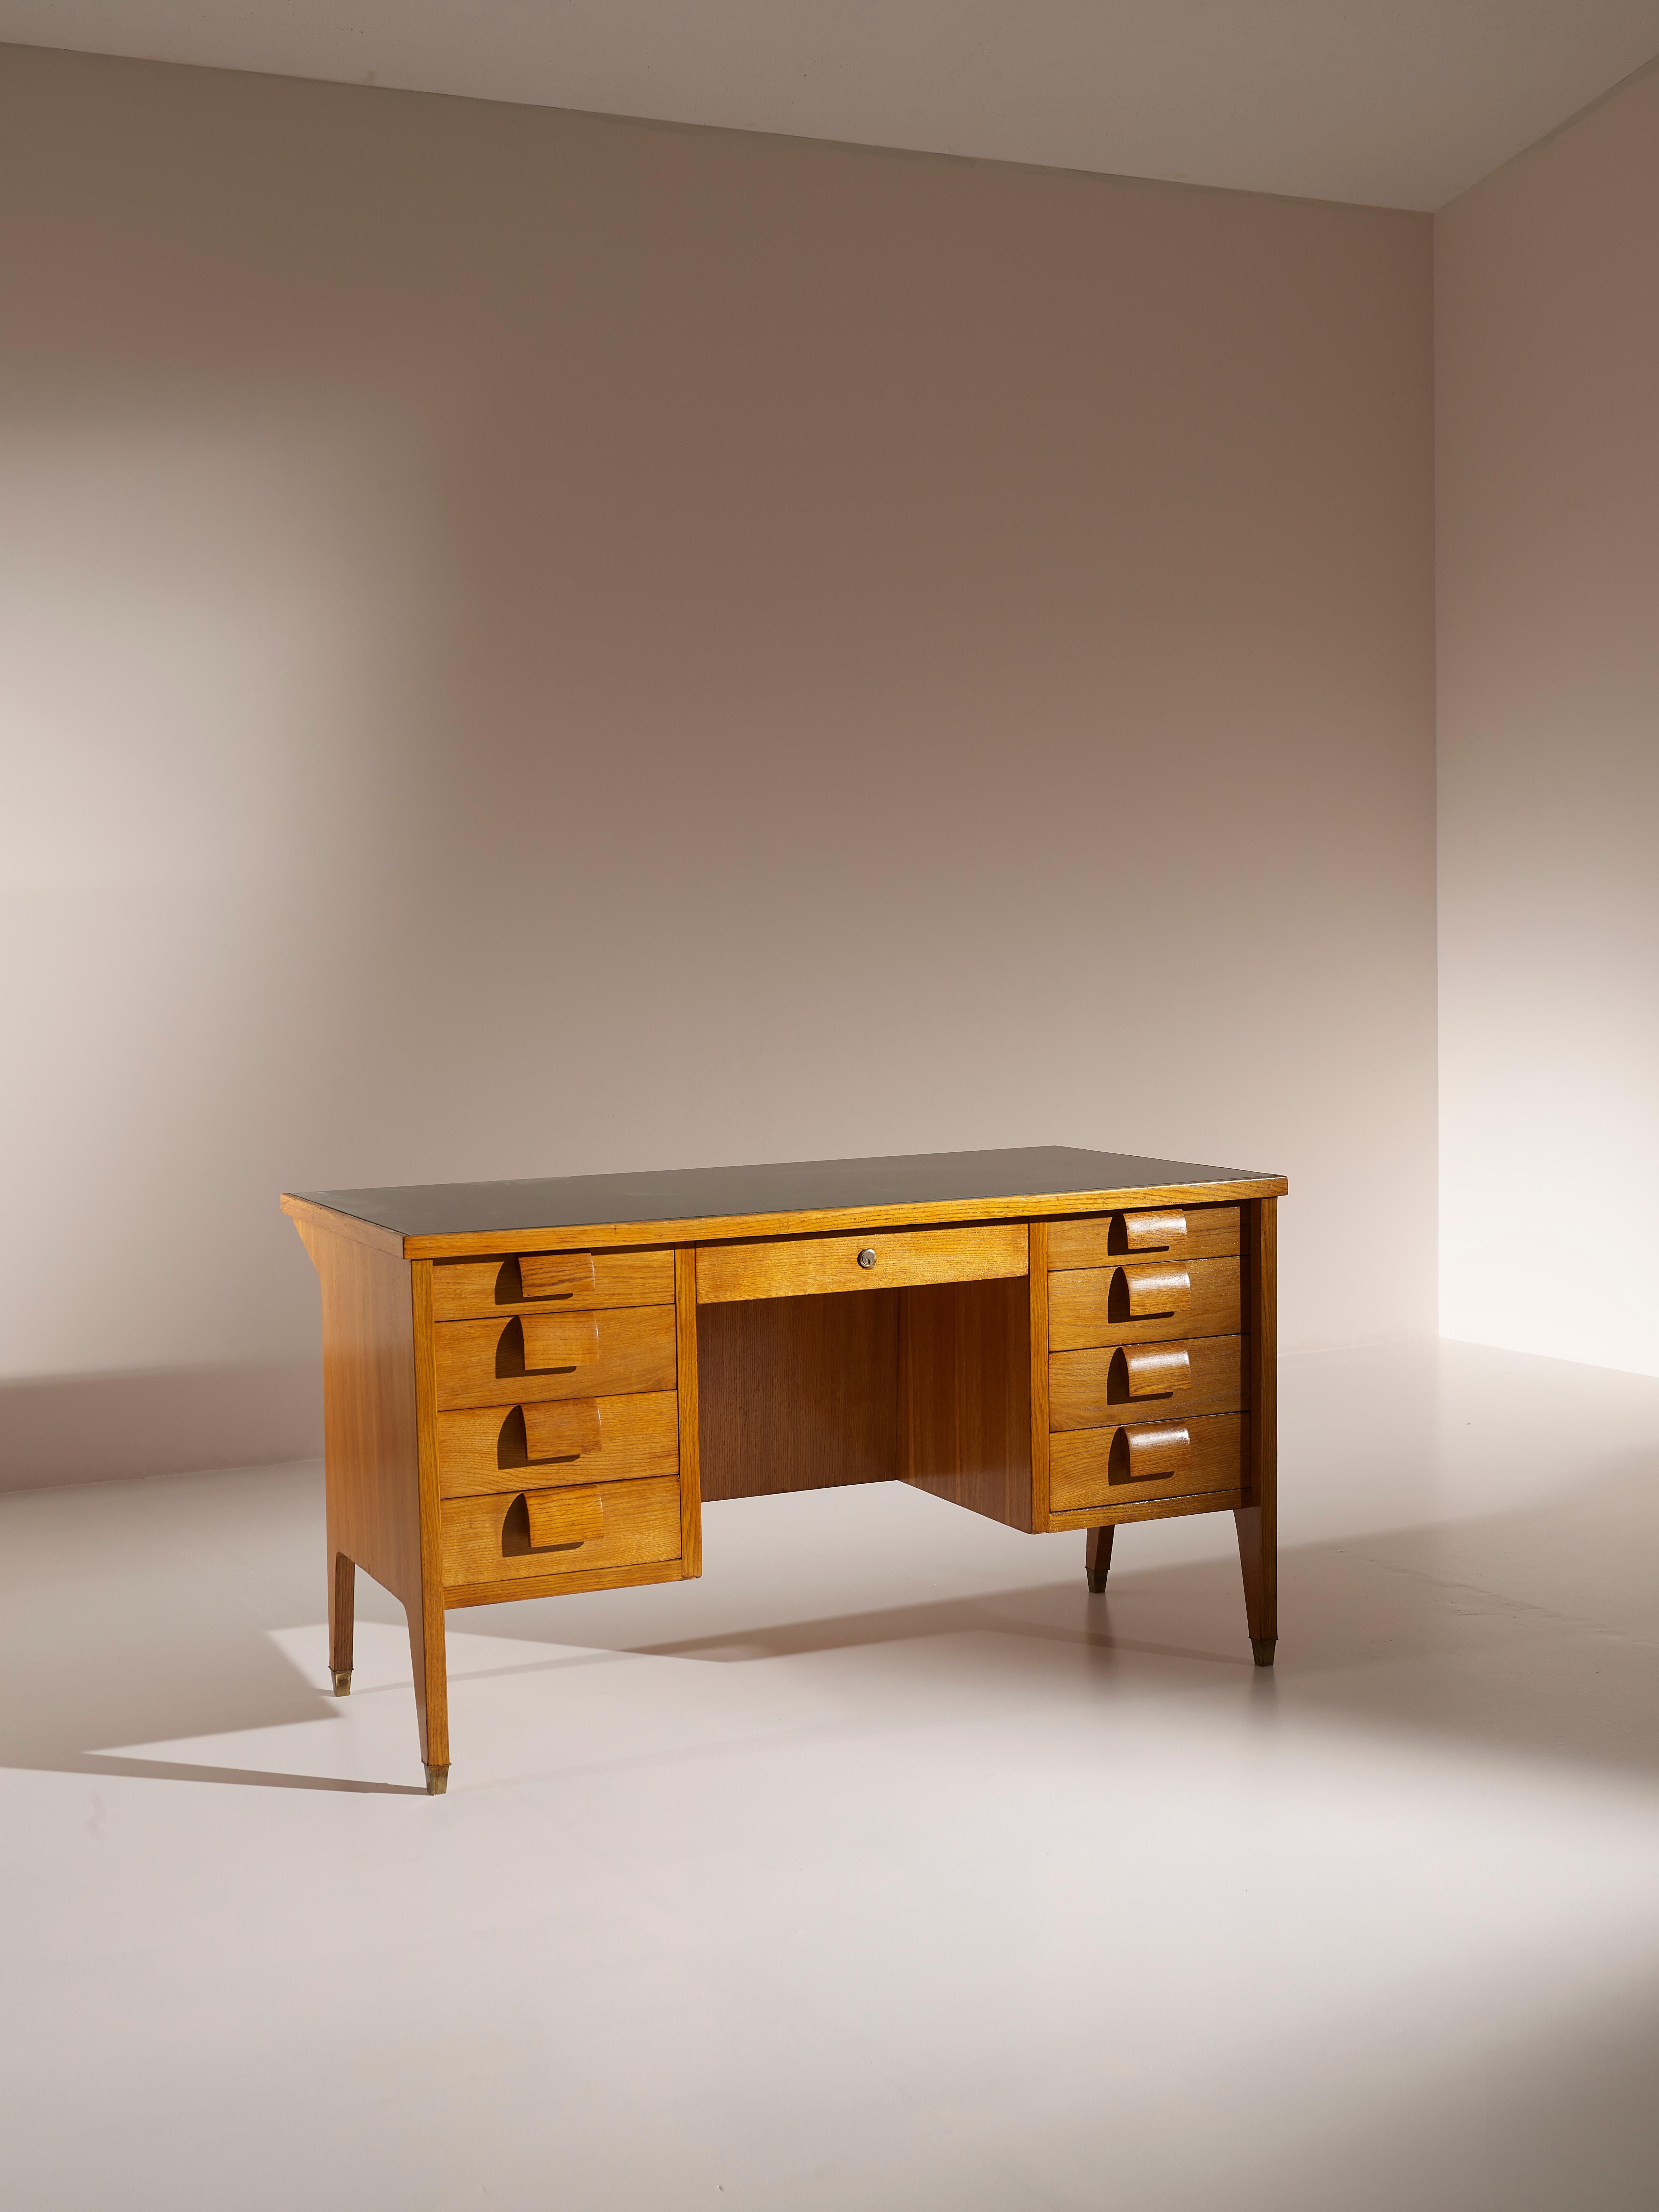 An executive desk produced in Italy in the 1950s with a beautiful design which reminds some Gio Ponti works.

Made in solid oak, this desk features eight side drawers with powerful, carved handles, a central drawer with key, a green glass top and